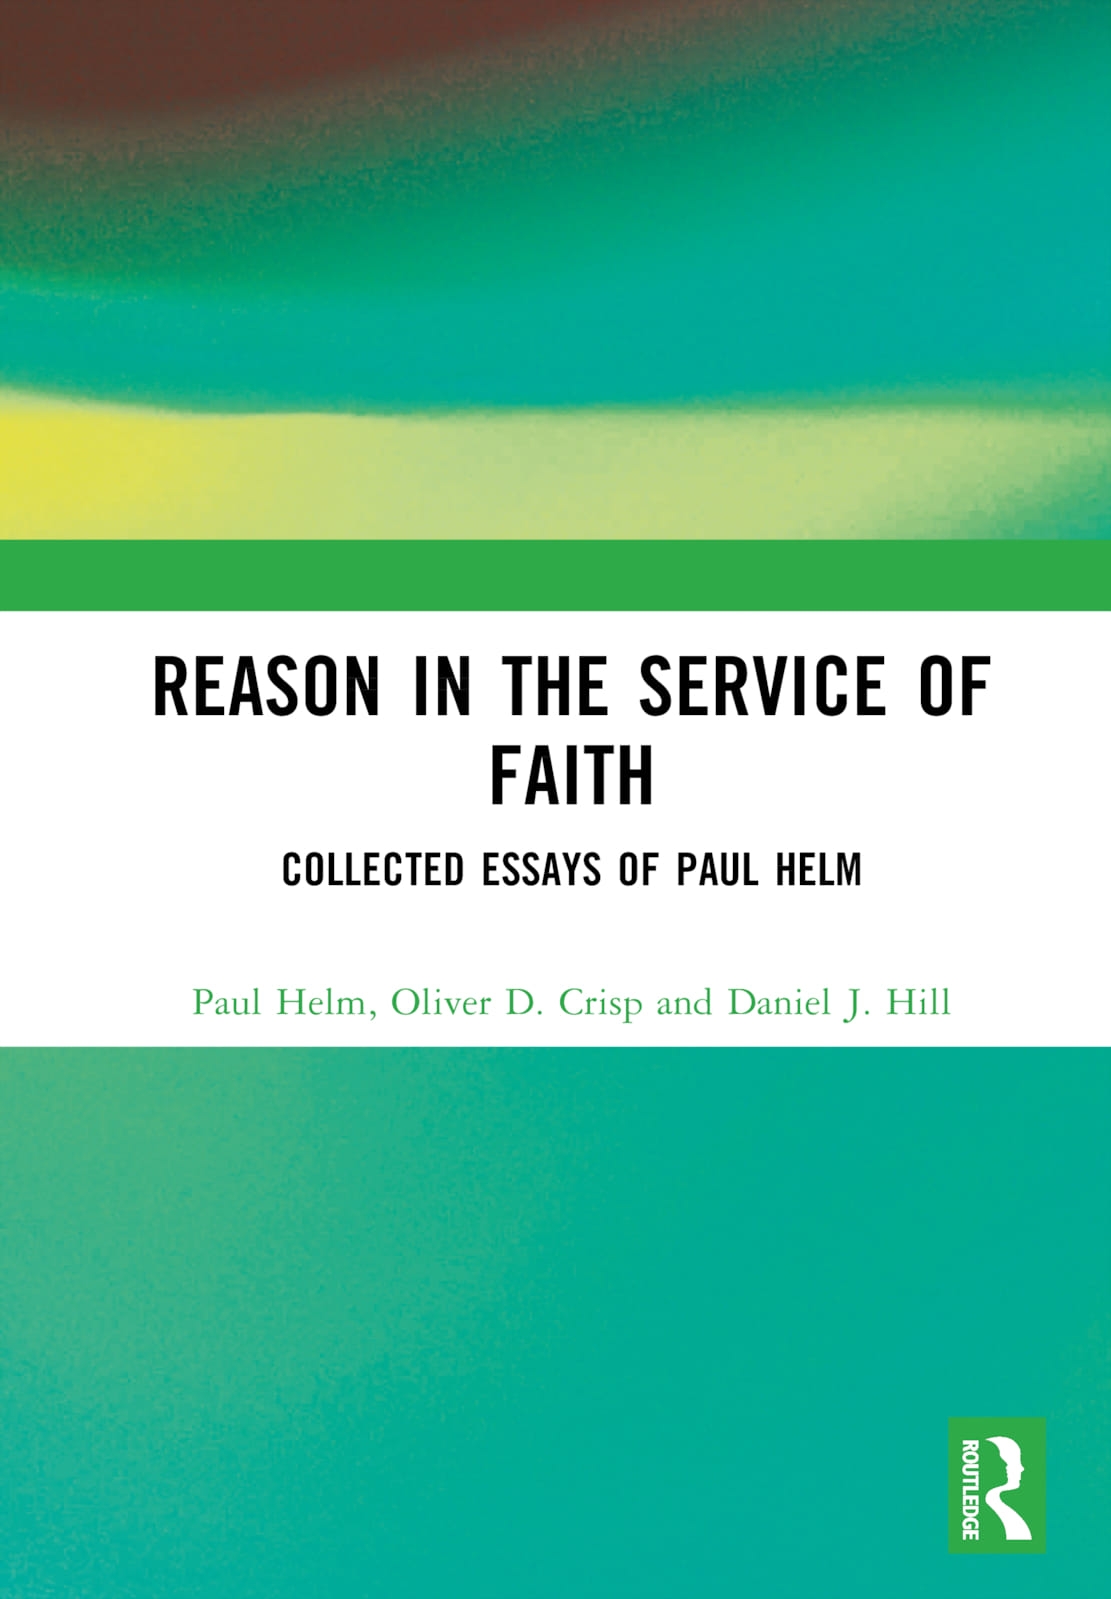 Helm on Philosophy of Religion: Collected Essays of Paul Helm